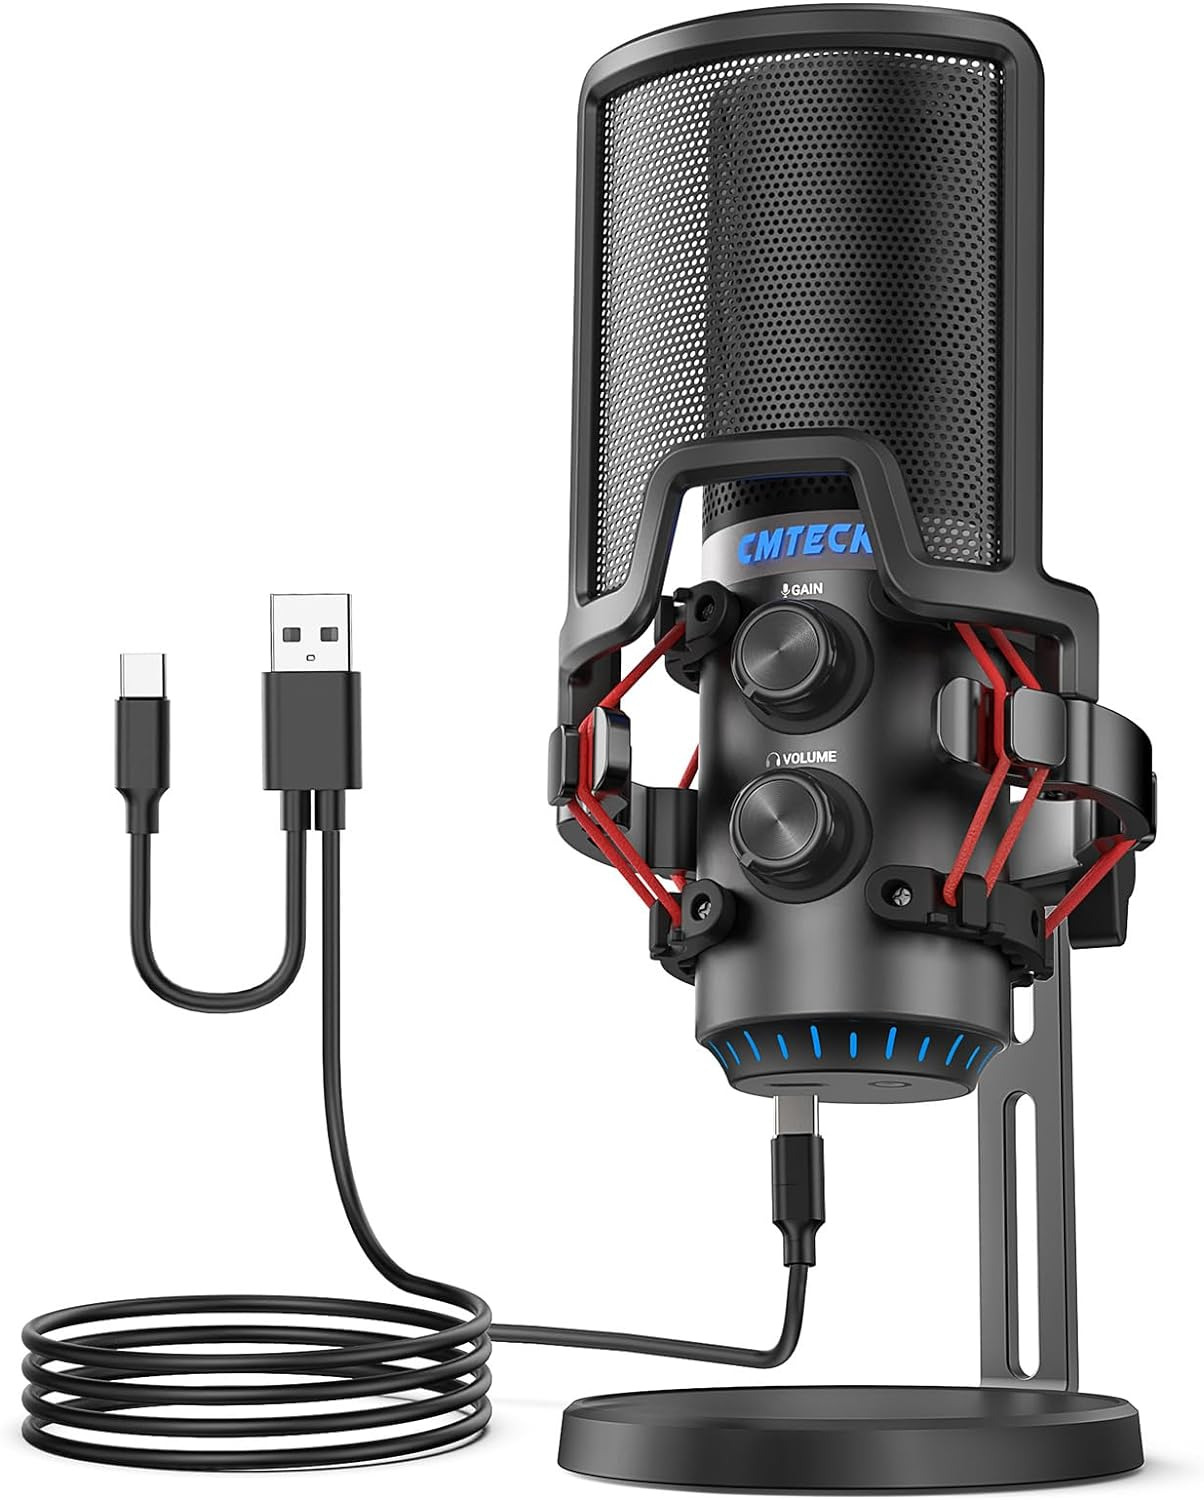 Professional USB Microphone with Pop Filter for Podcast, Streaming, Recording